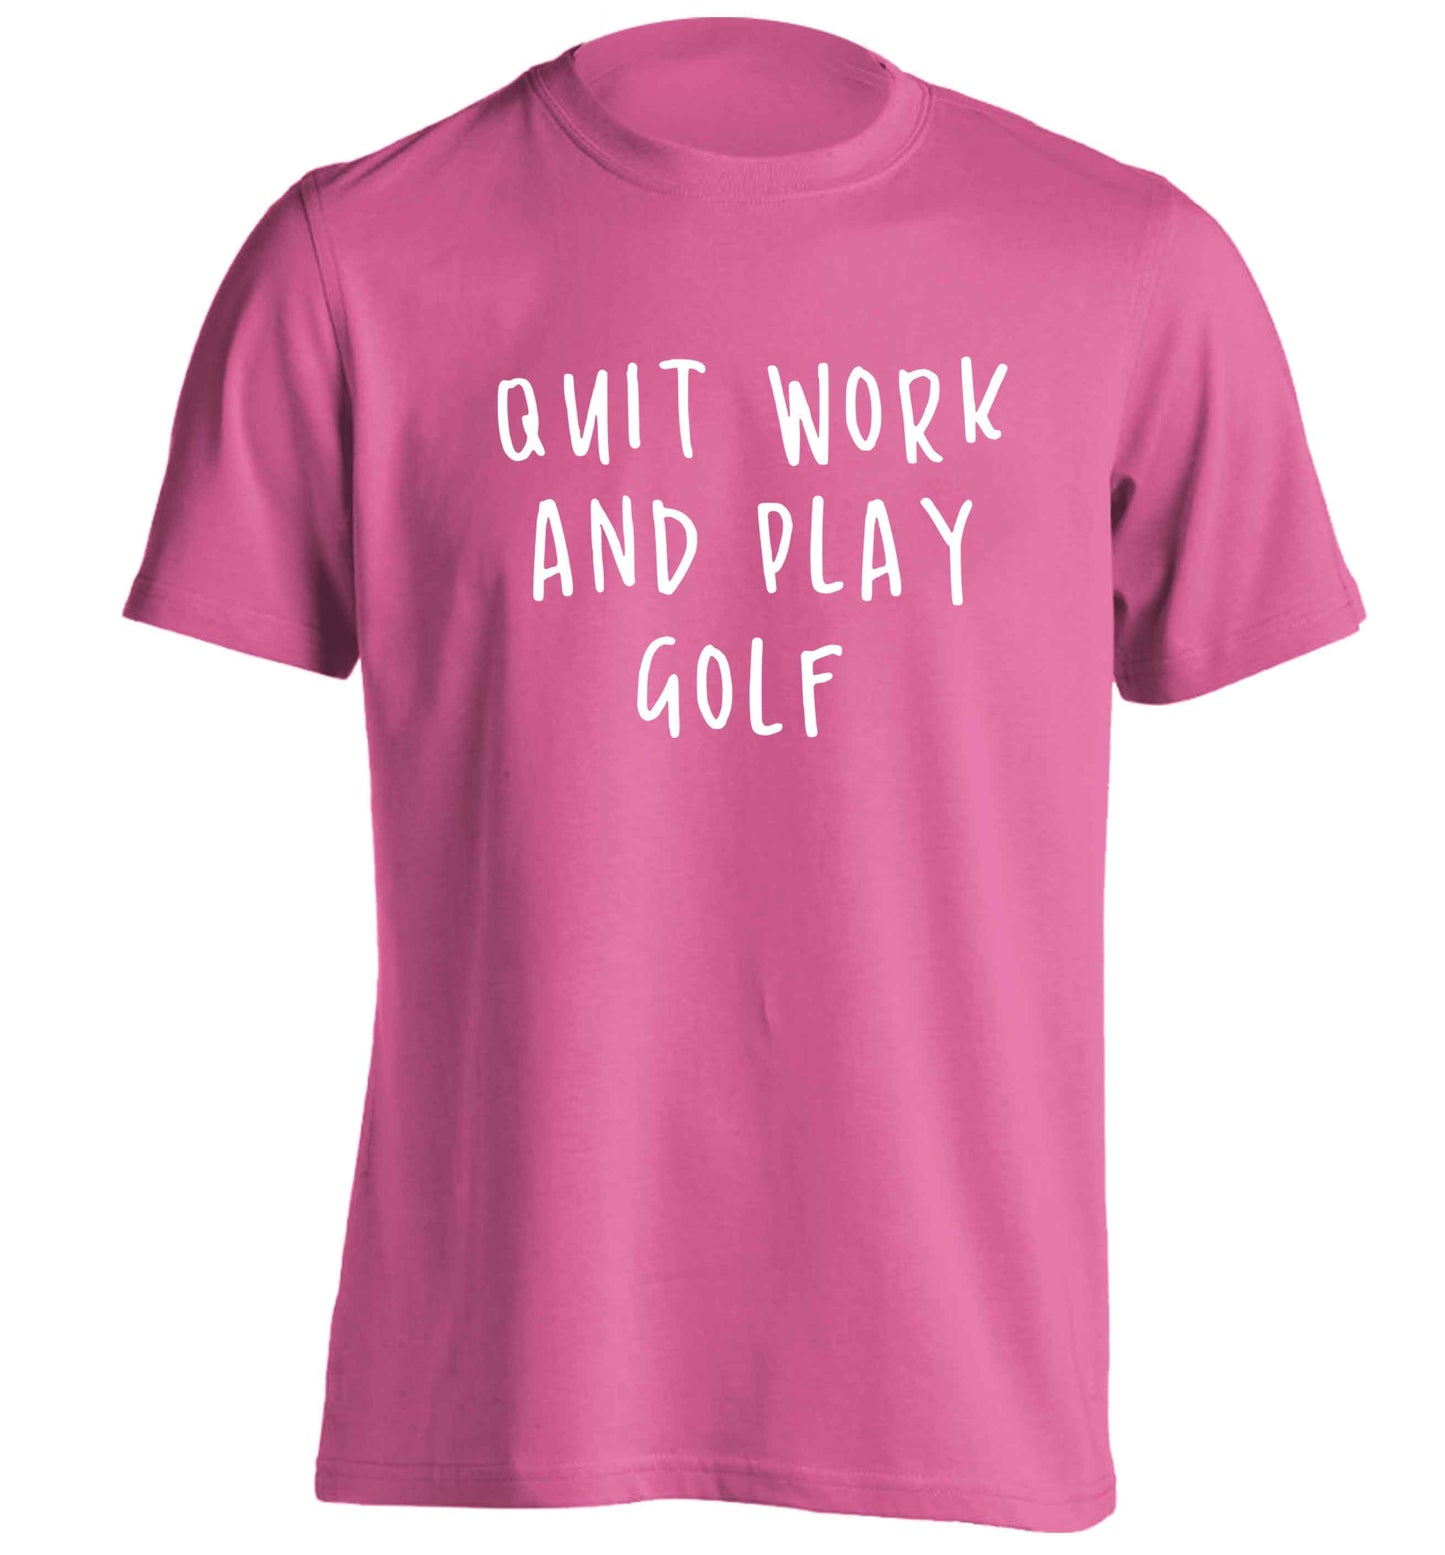 Quit work and play golf adults unisex pink Tshirt 2XL